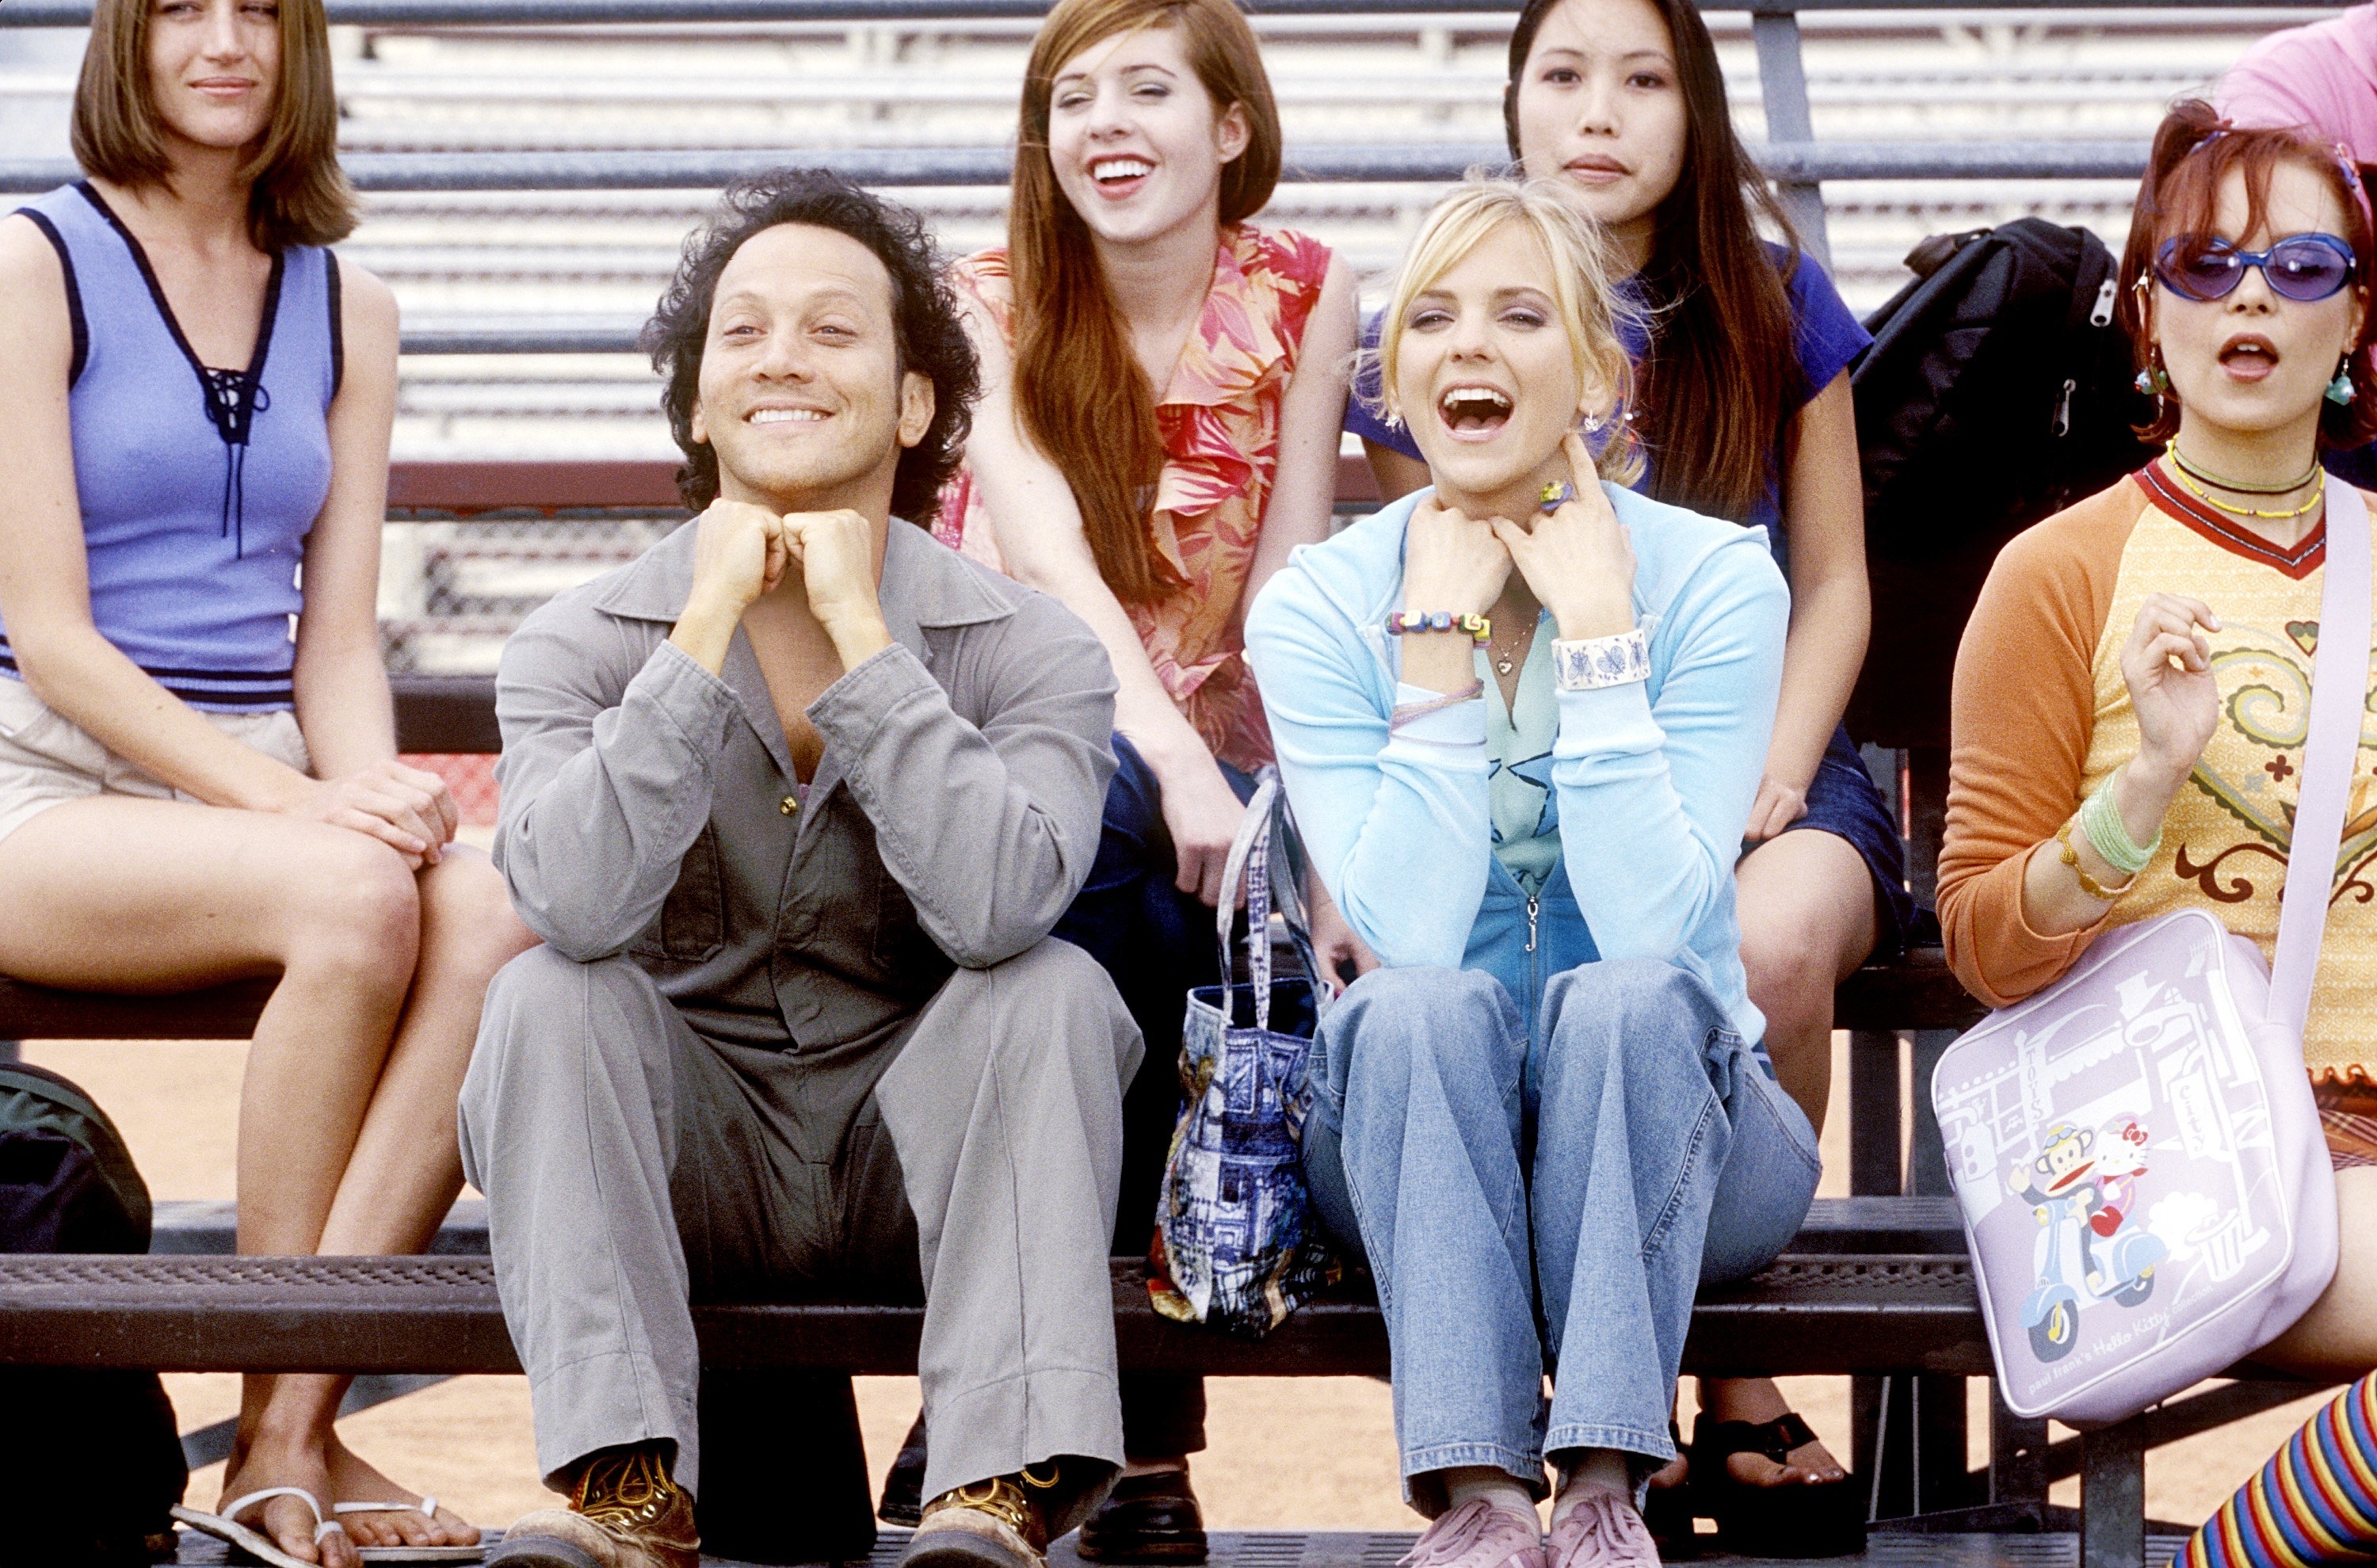 Rob Schneider and Anna Faris in the movie the hot chick